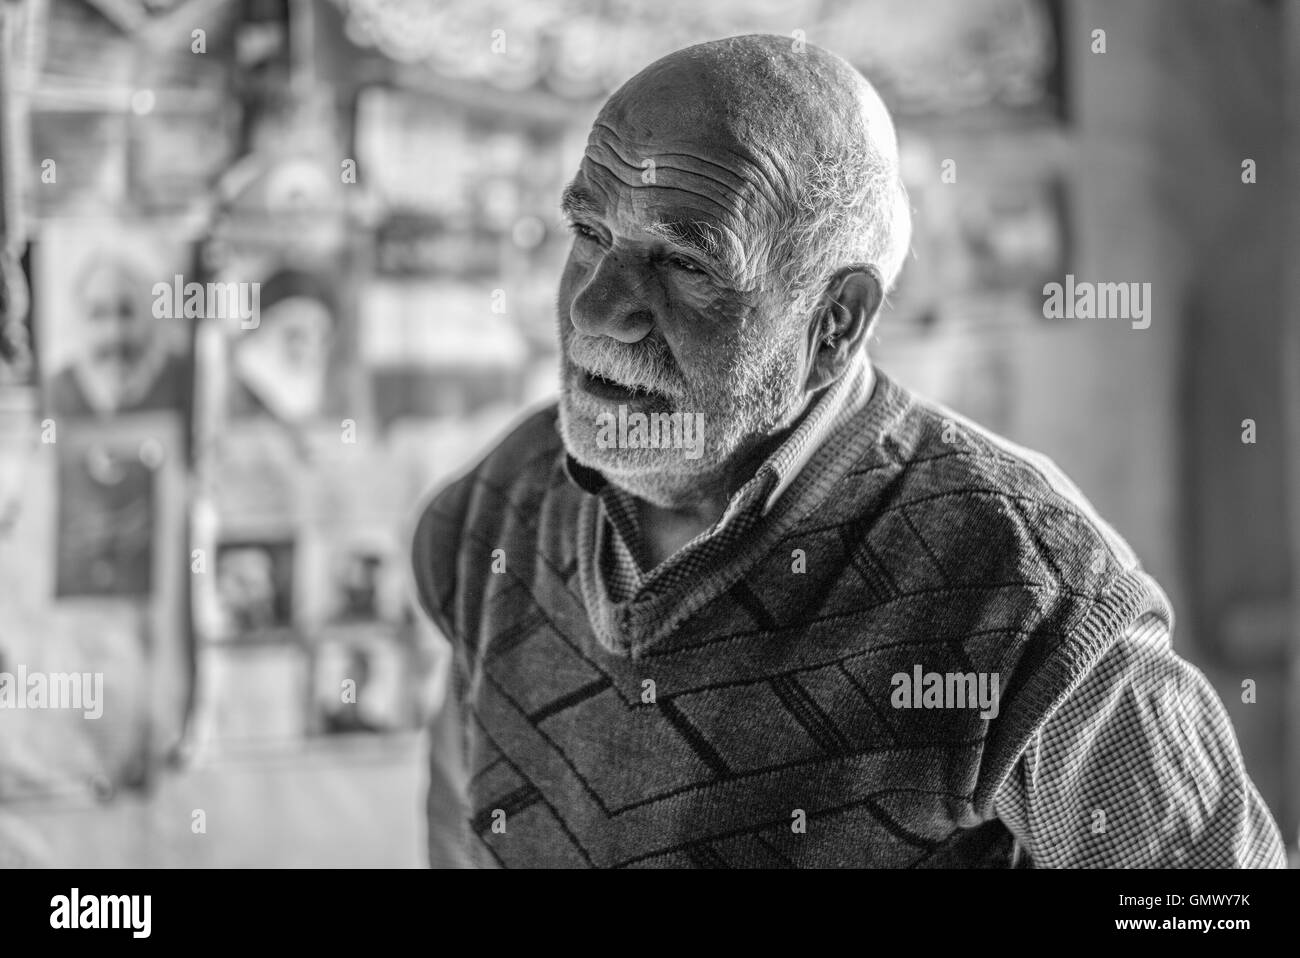 Mohammed Mehdi Mohhebi , oil processing shop owner in Isfahan, Iran, welcomes visitors to his ancient shop. Stock Photo